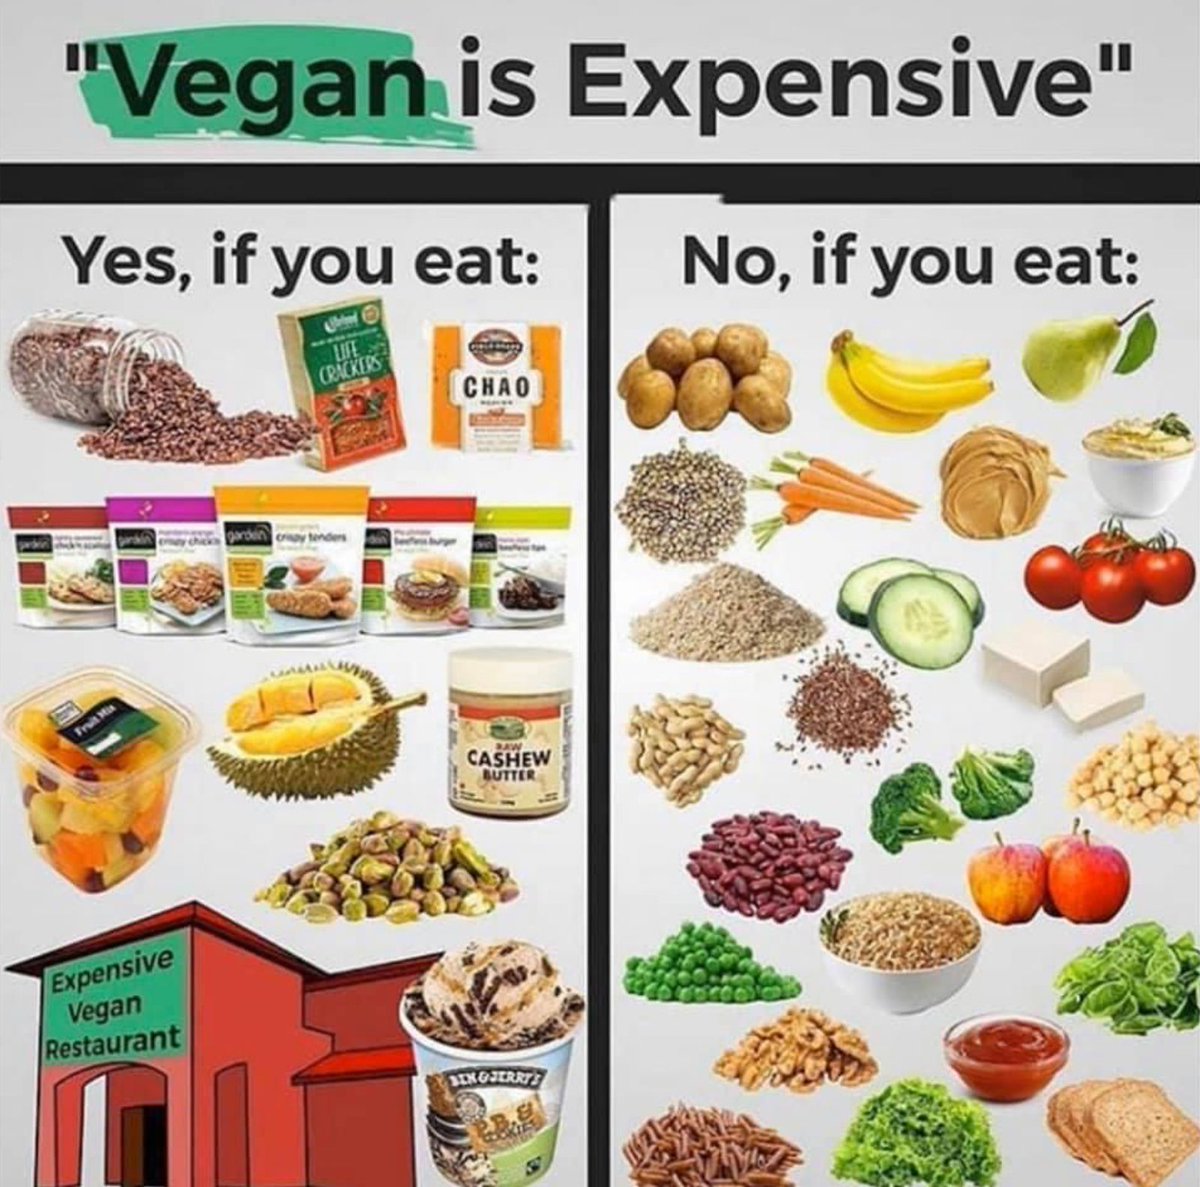 Eating healthy doesn’t have to be expensive. #nutrition #wellness #wellnessblog #plantbased #plantmedicine #plantbasednutrition #healthyself #foodismedicine #healthyliving #healthylifestyle #naturalwellness #wellnesswarrior #healthylivingtips #healingwithfood #healthy #health